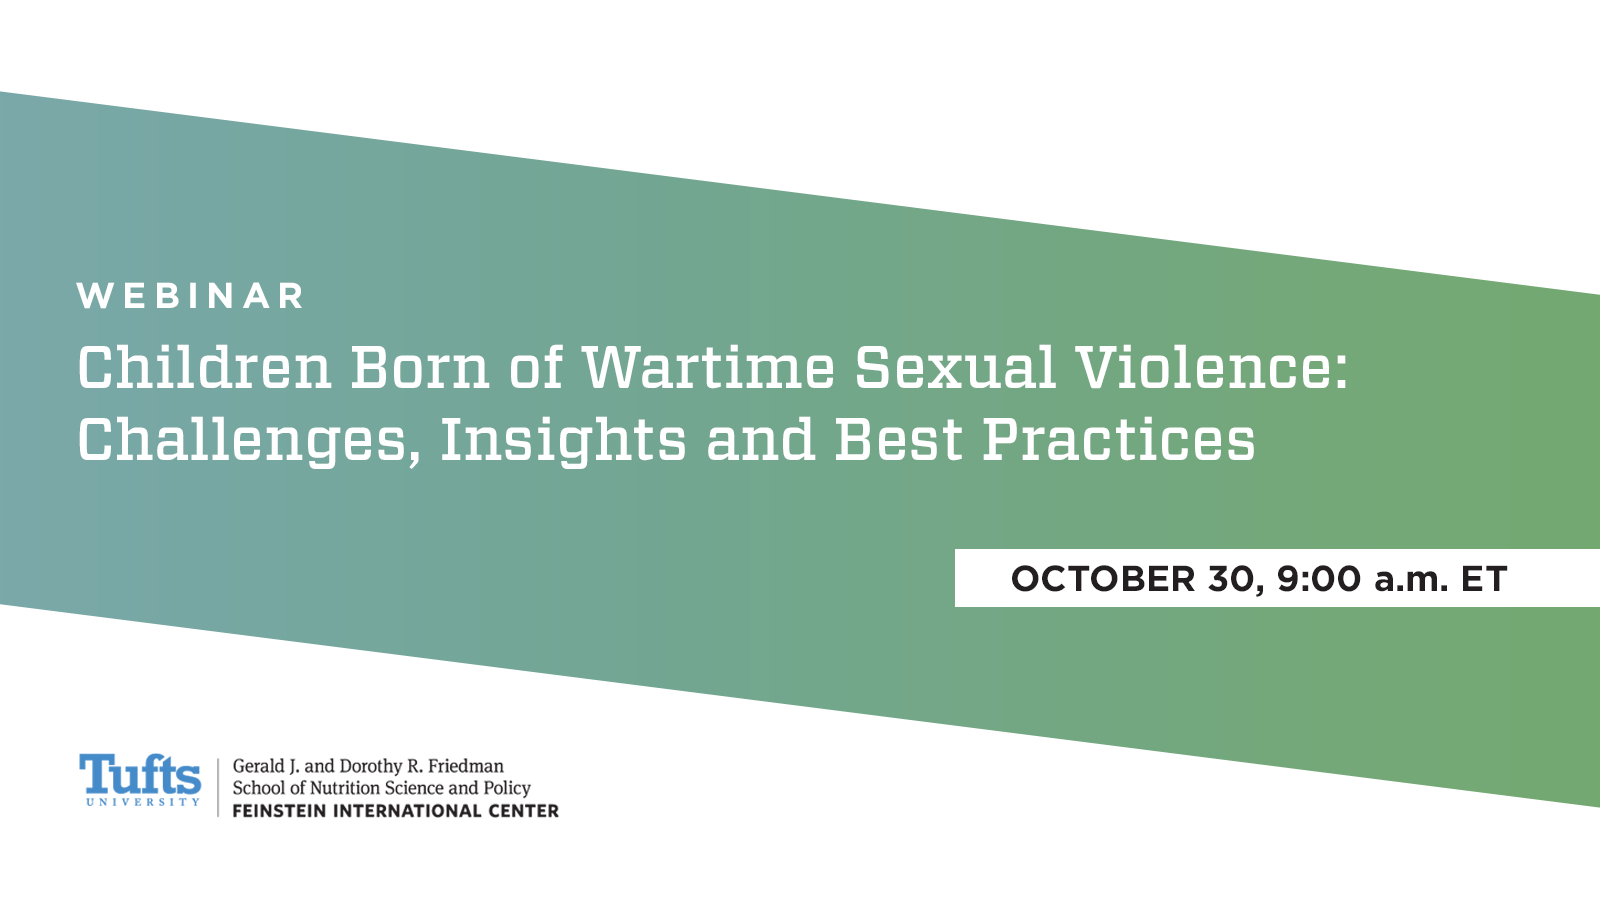 A green flyer with the words "Webinar: Children Born of Wartime Sexual Violence:Challenges, Insights and Best Practices," October 30, 9am ET and the Tufts University logo in blue.